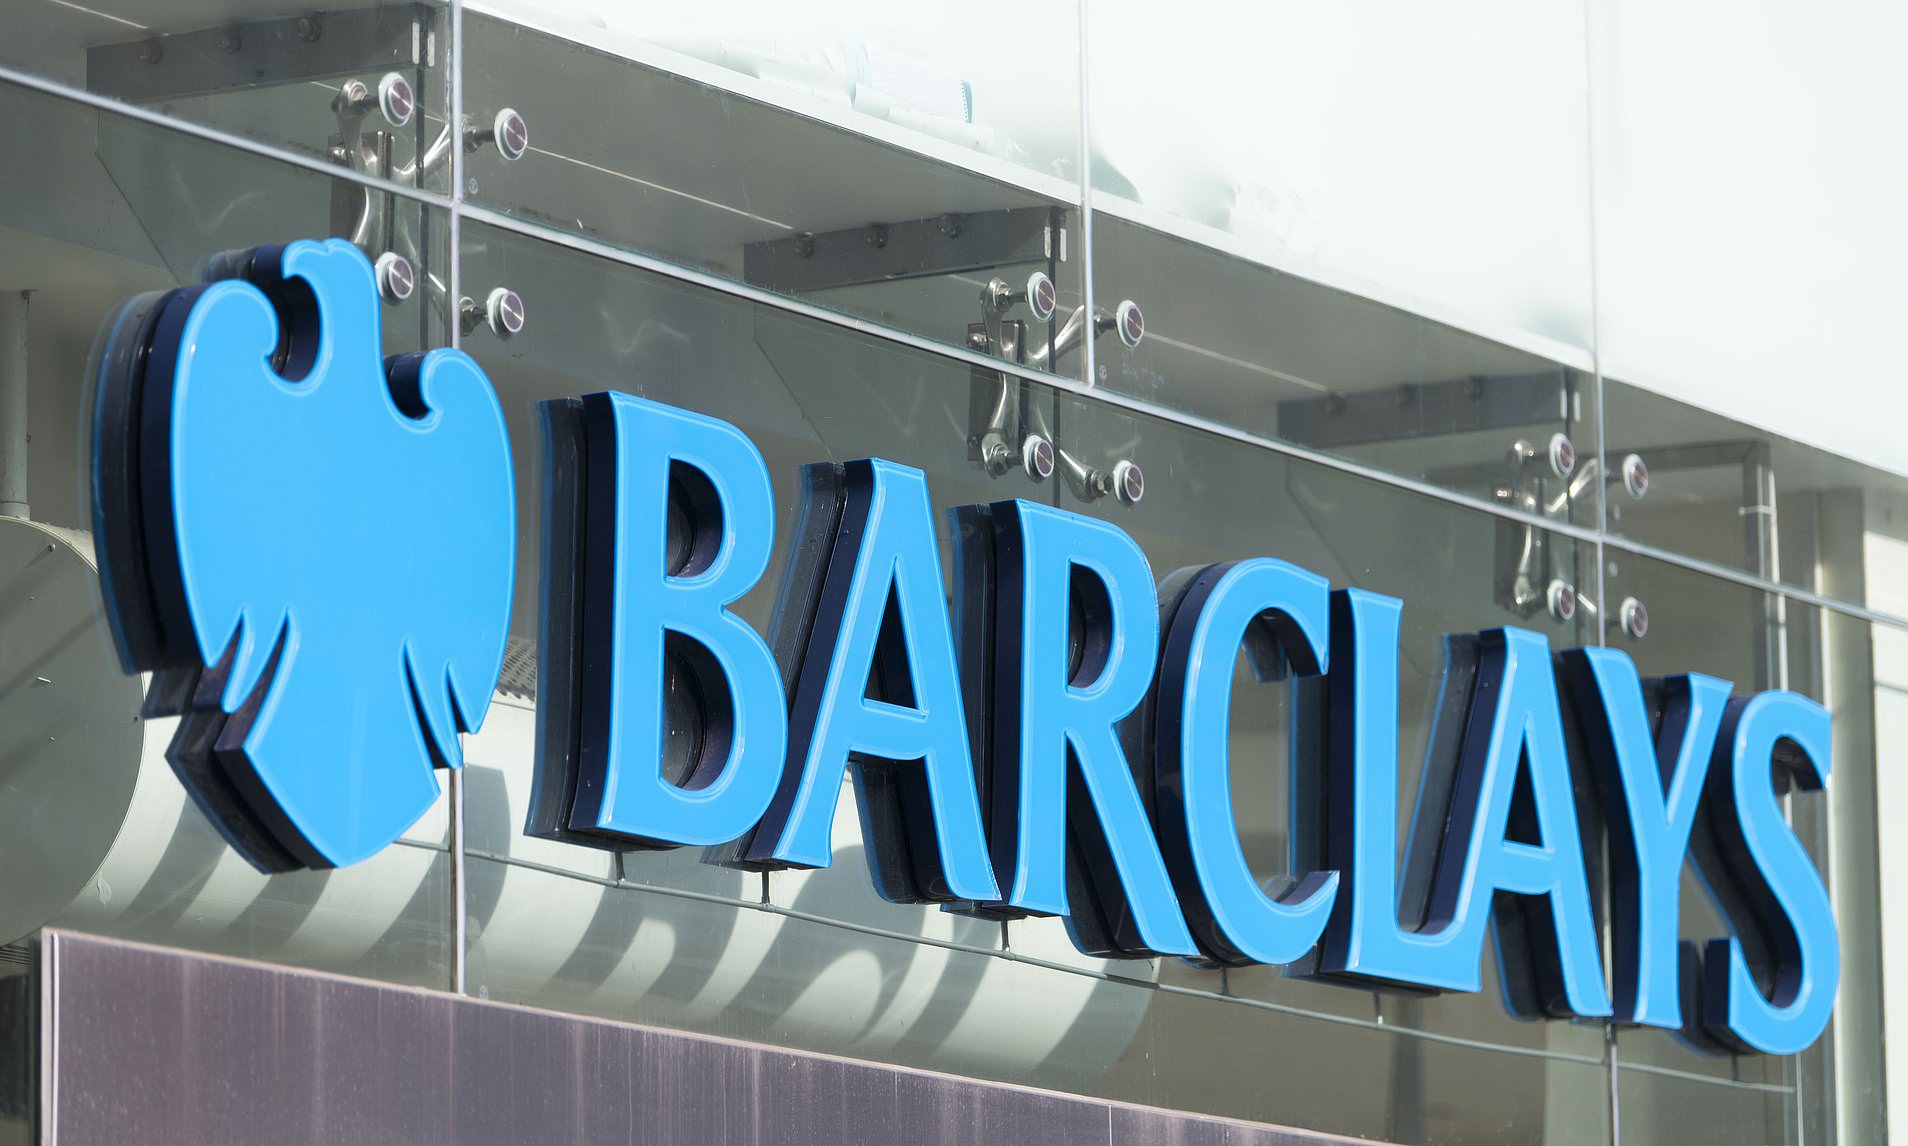 Barclays Announces New Senior Appointments in The Consumer Retail Group